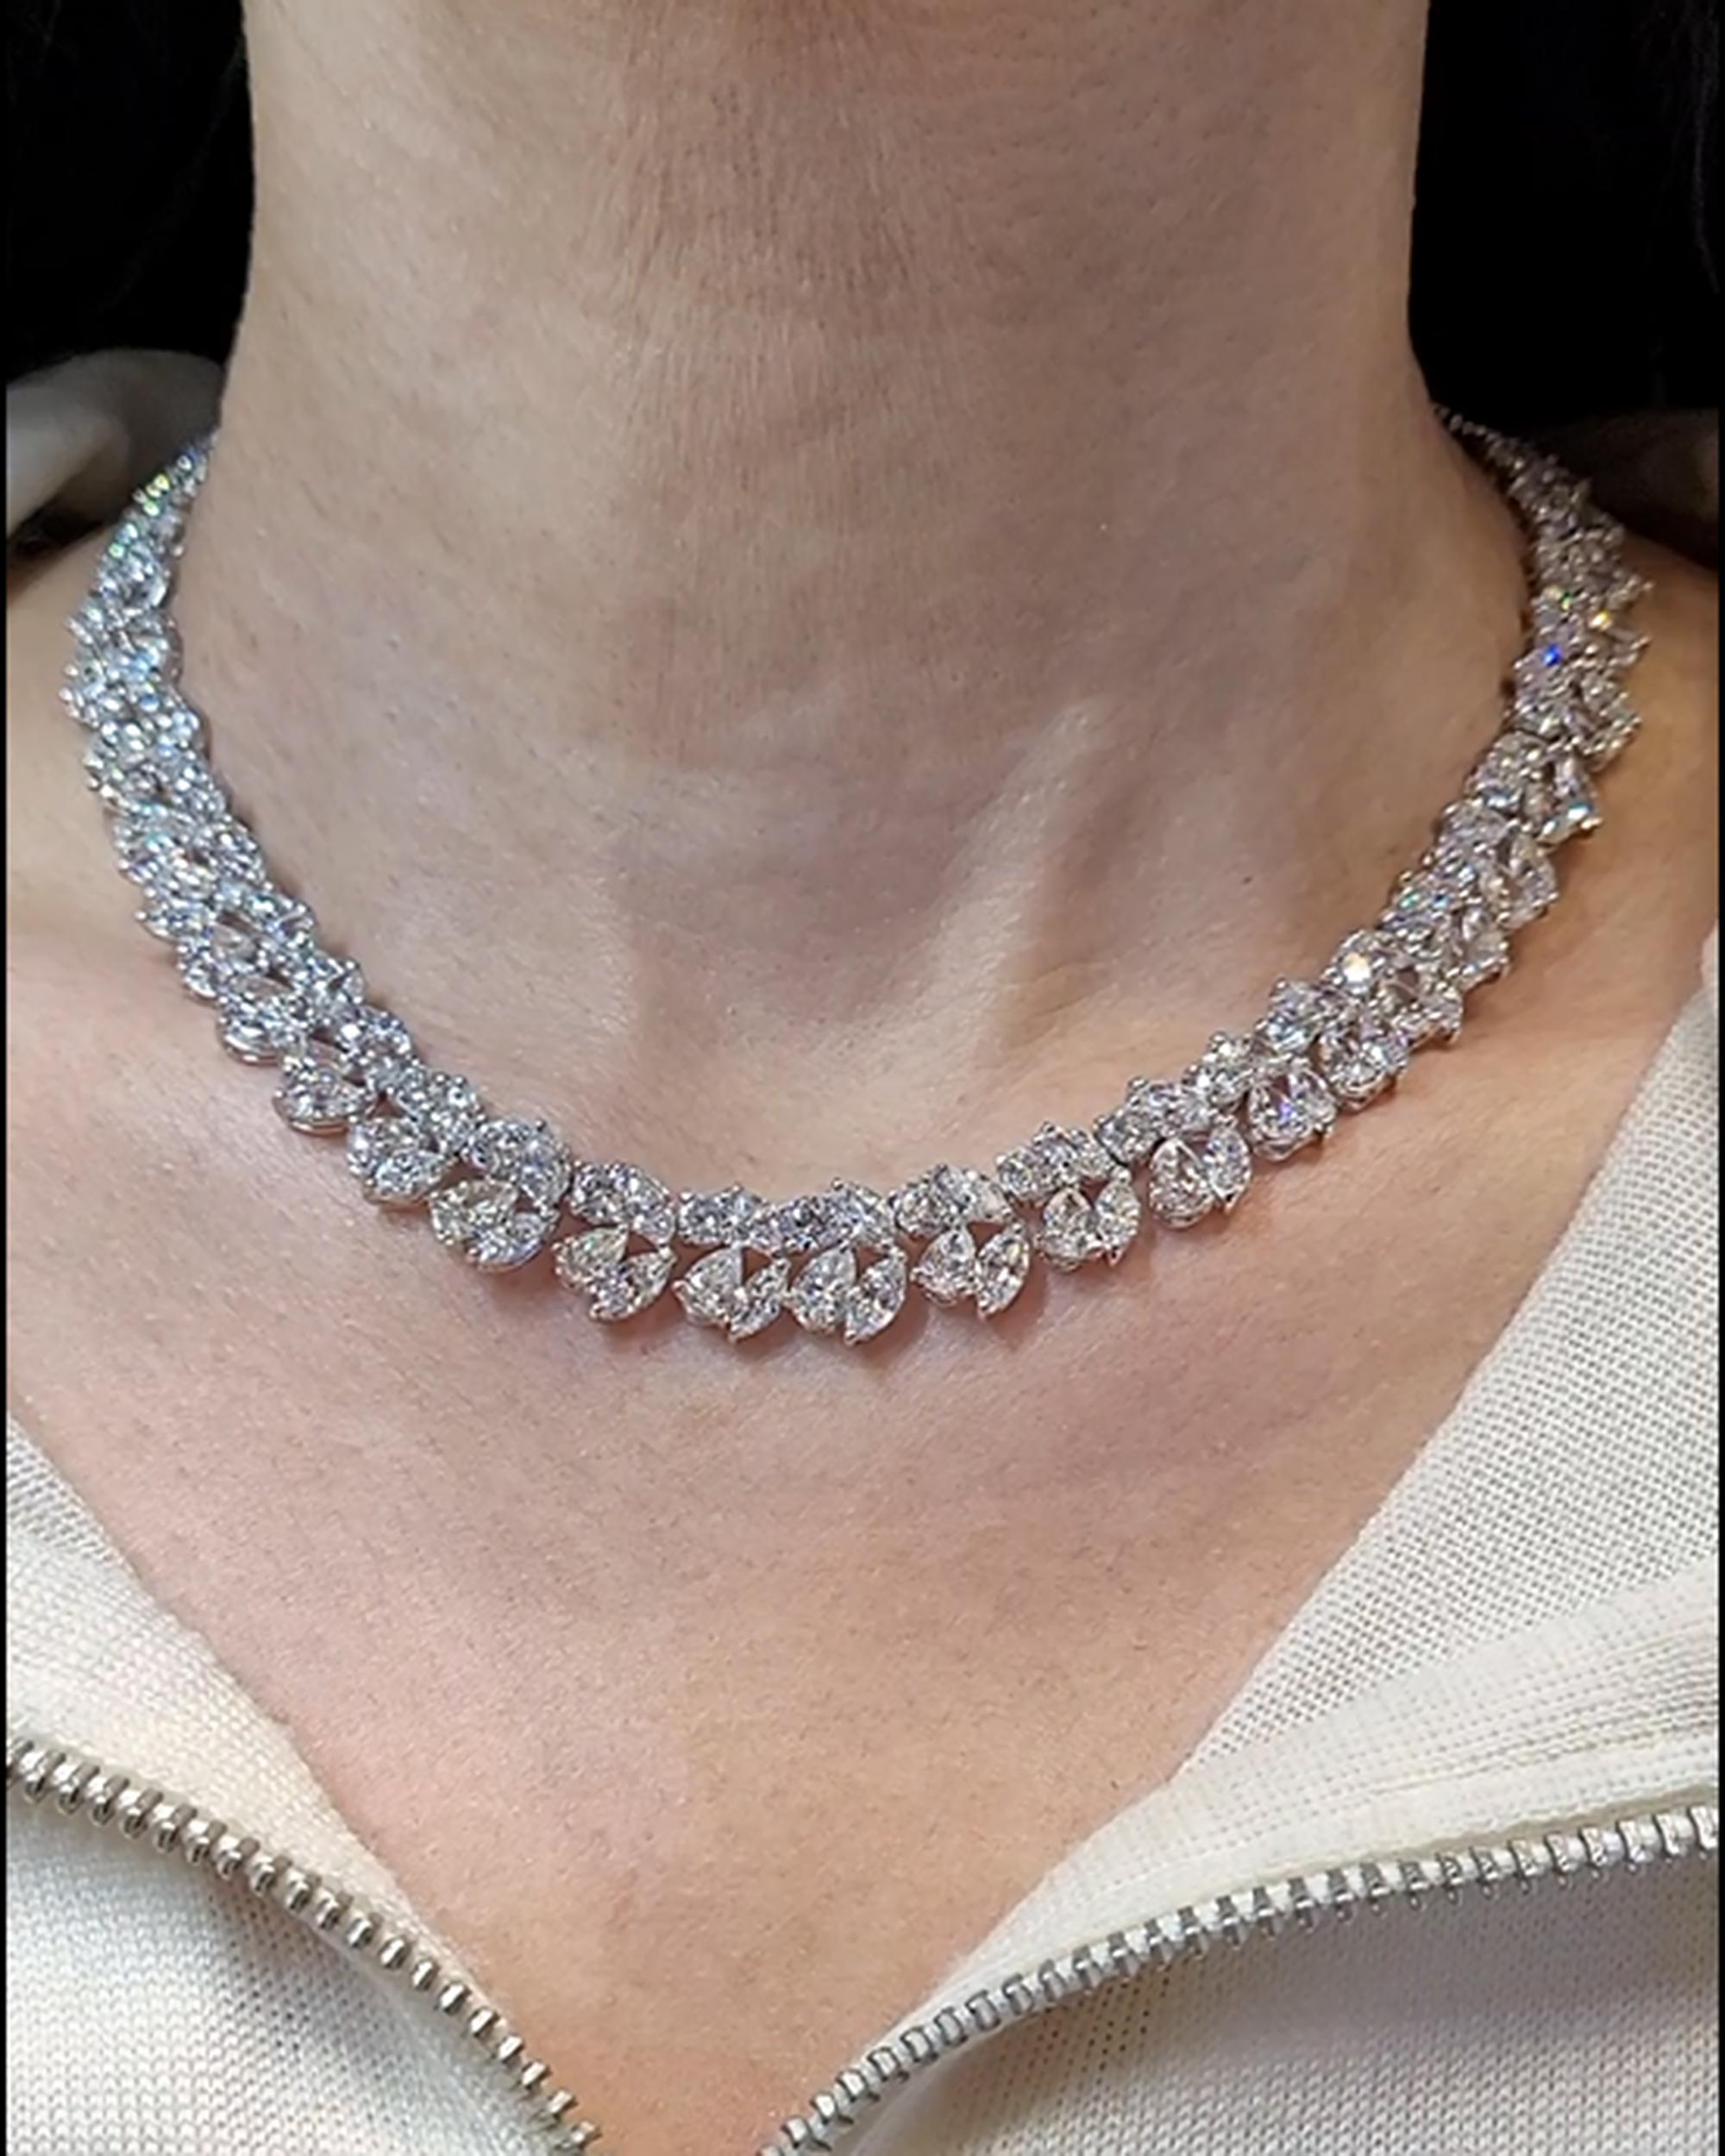 A timeless emblem of luxury, this Contemporary Diamond Cluster Necklace boasts an unparalleled brilliance in its stylized foliate design. Crafted in the 21st century from 18k white gold, this exquisite piece showcases a harmonious blend of marquise,